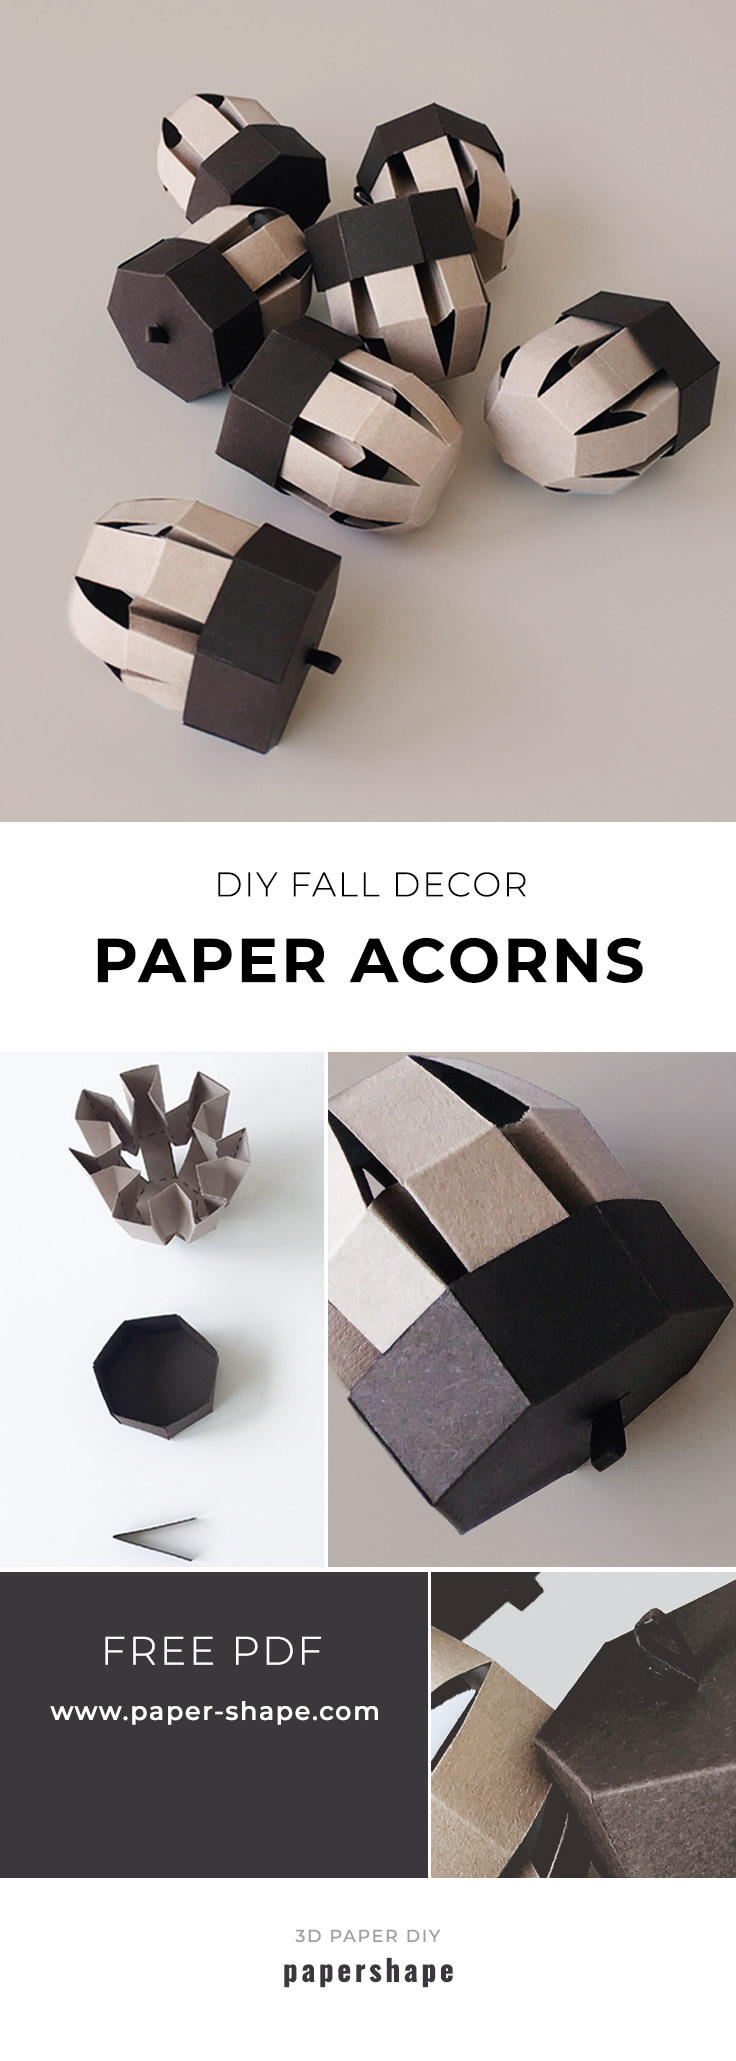 cute acorn craft idea from paper for your fall decoration - free template for adults from papershape #papershape #diy